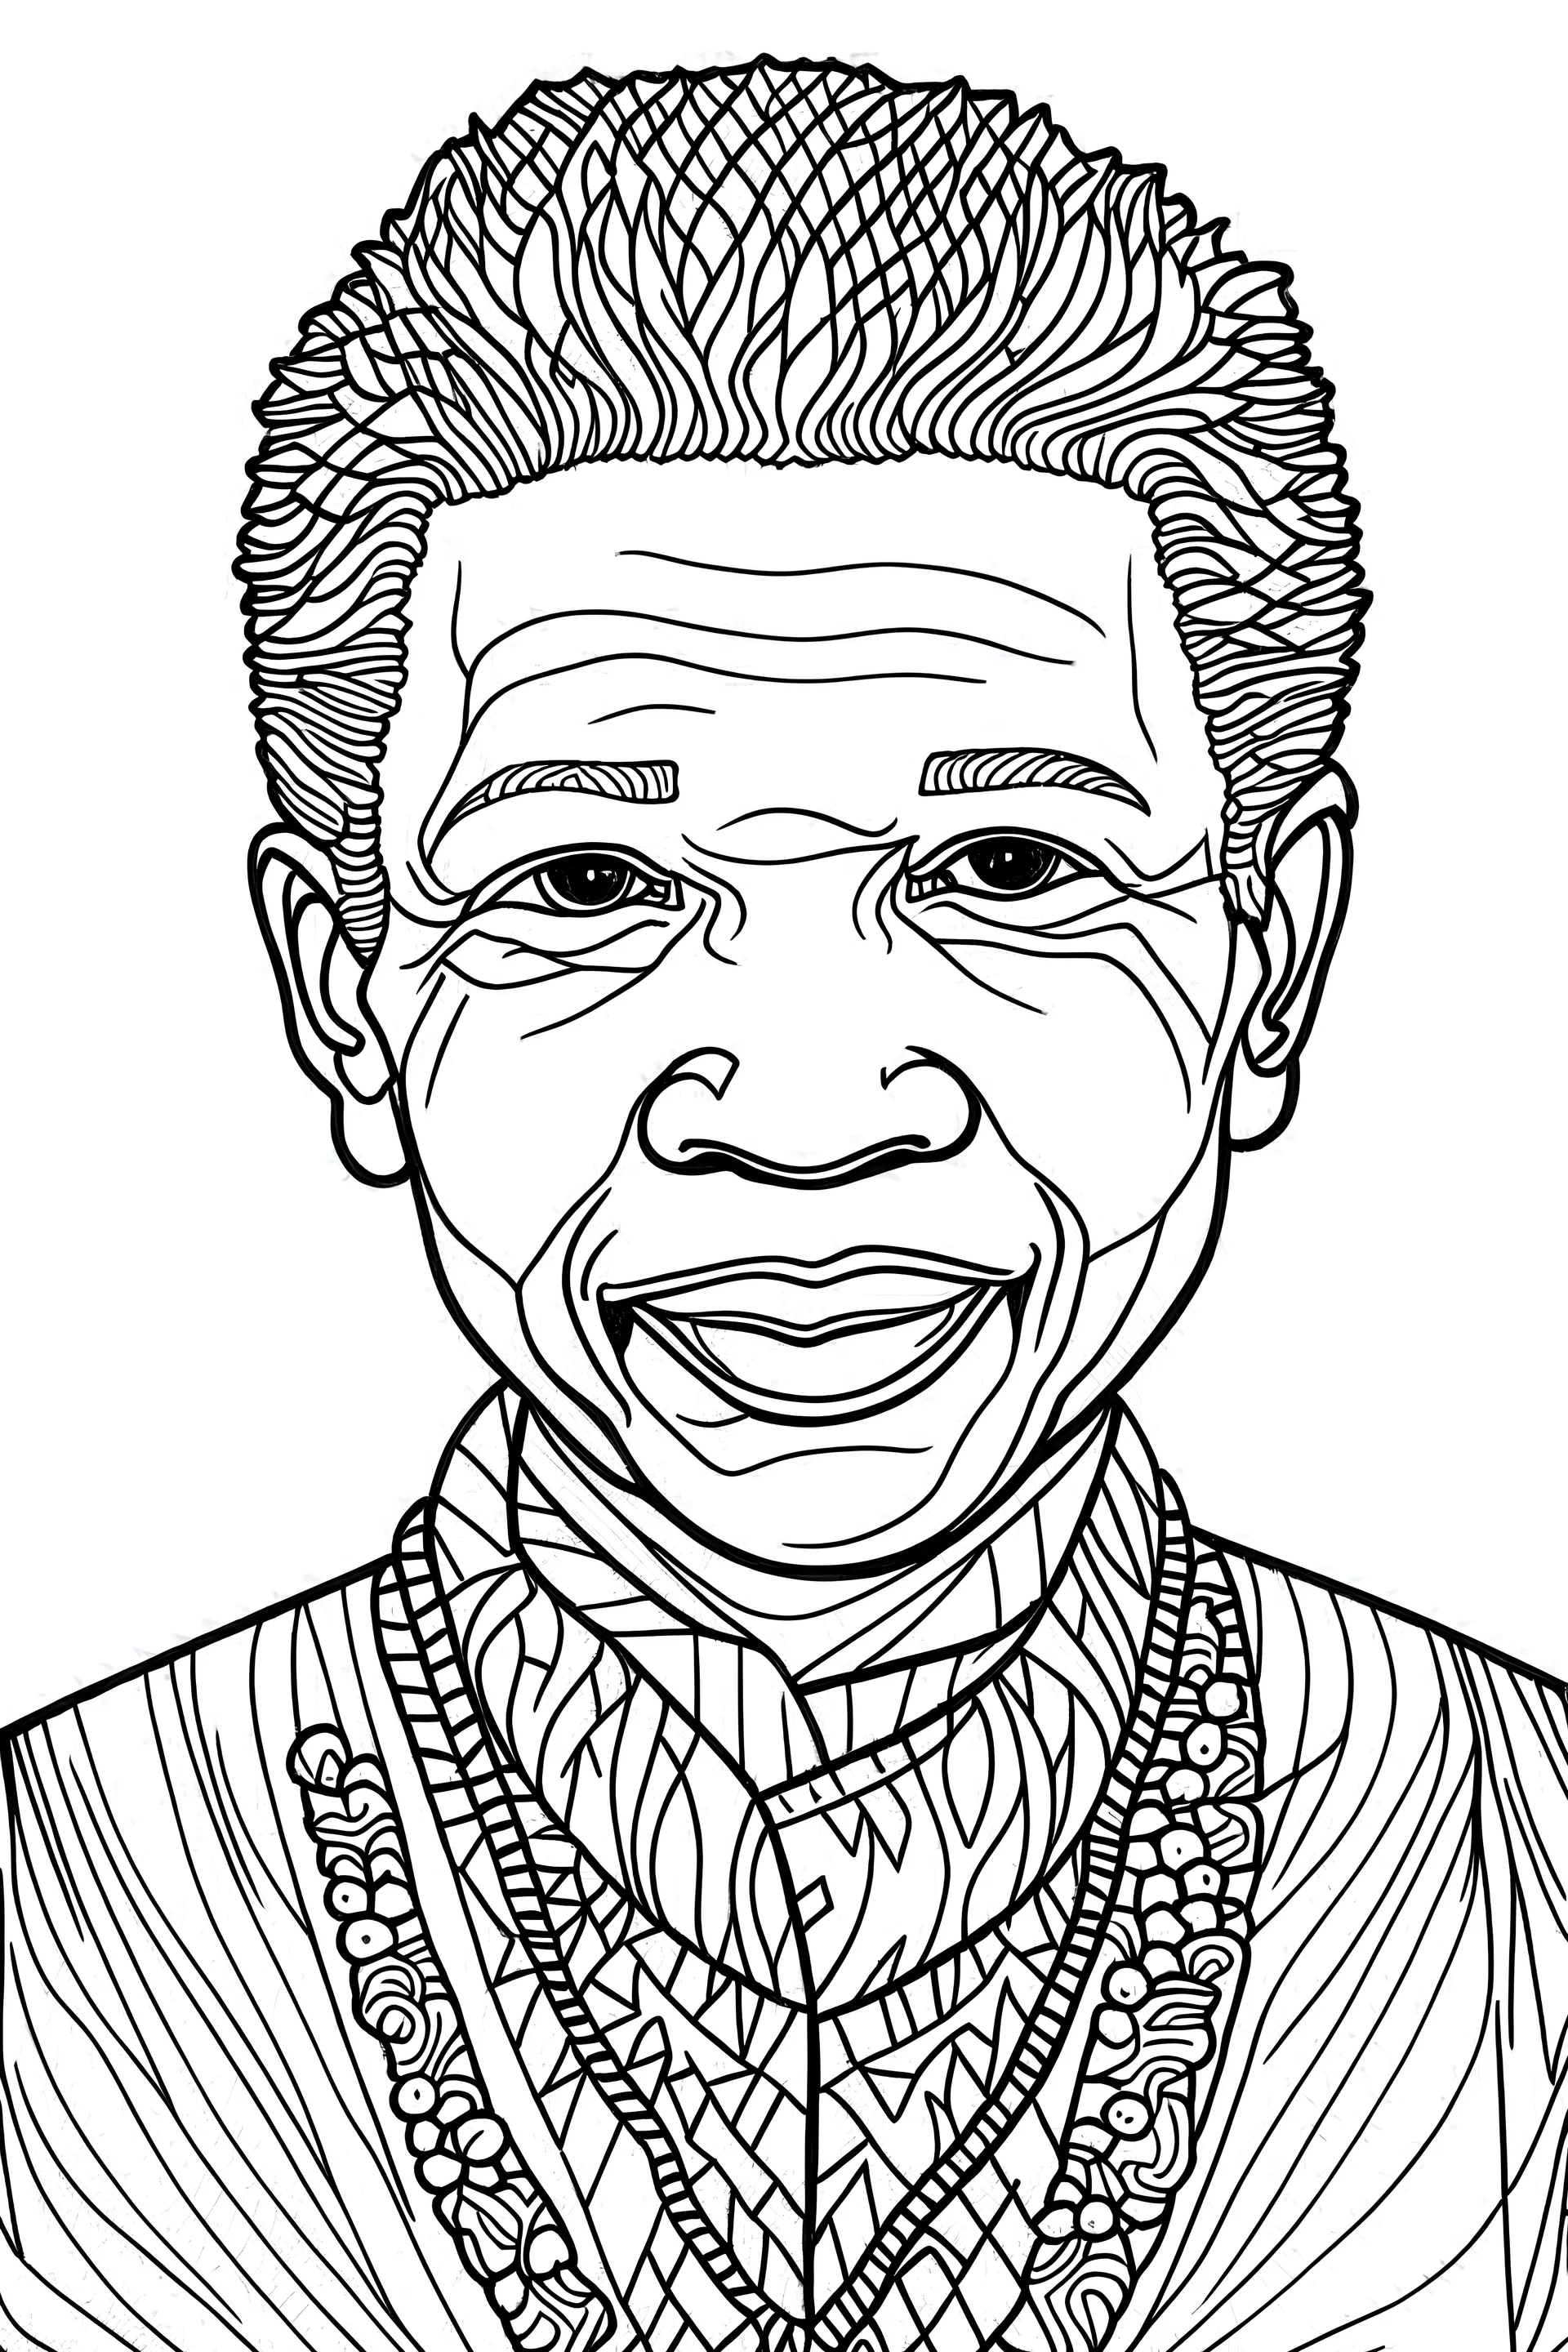 Nelson Mandela drawing south African President 18th July 1918 15th December  2013 print/poster/canvas - Etsy